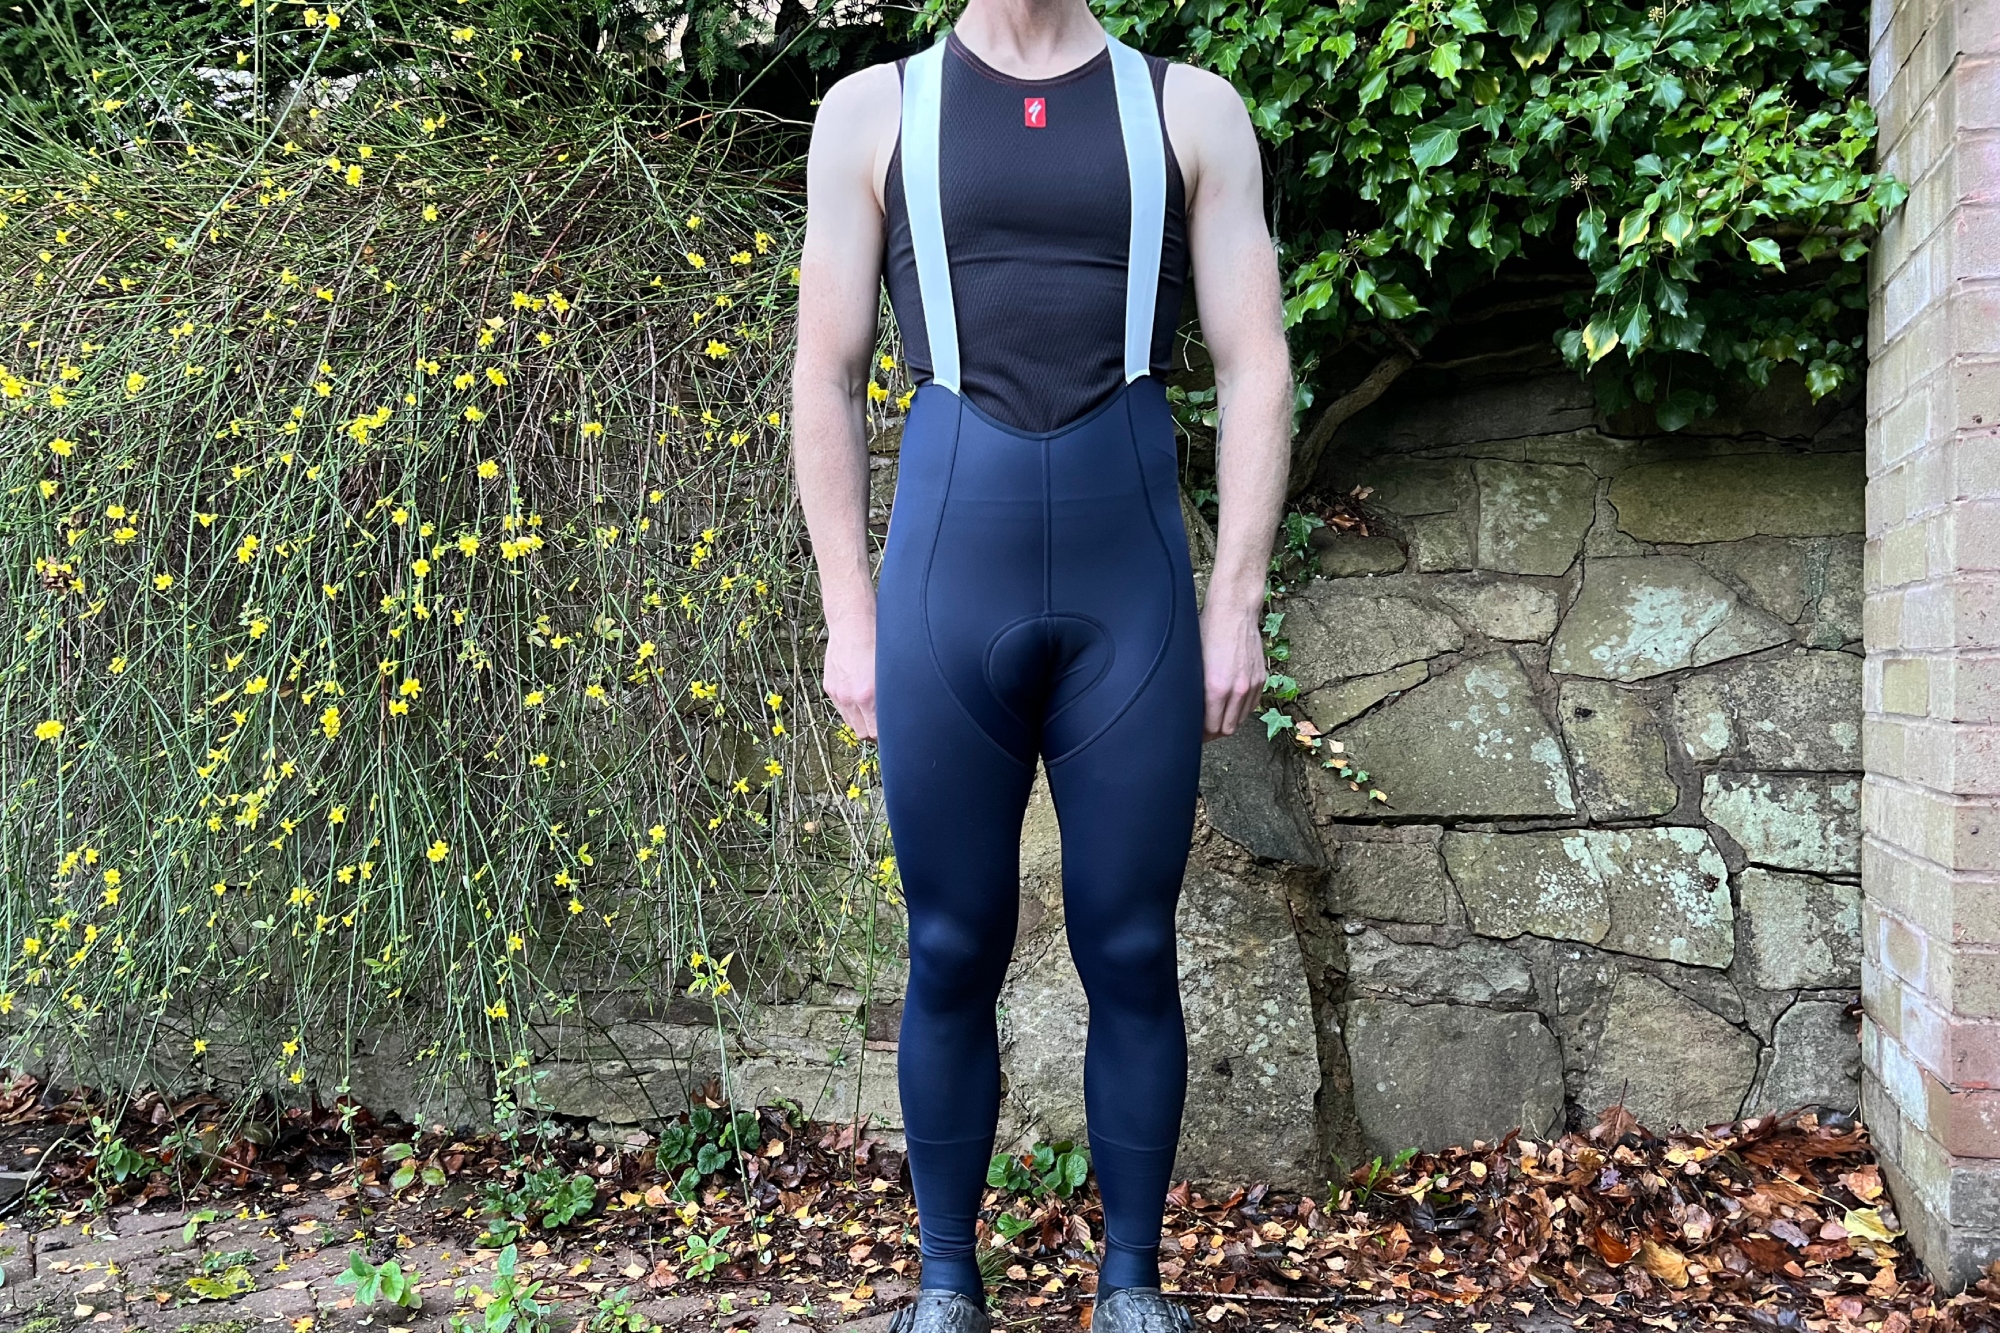 Rapha Pro Team Training tights leave us questioning why more cycling brands  tights aren't this sustainable.